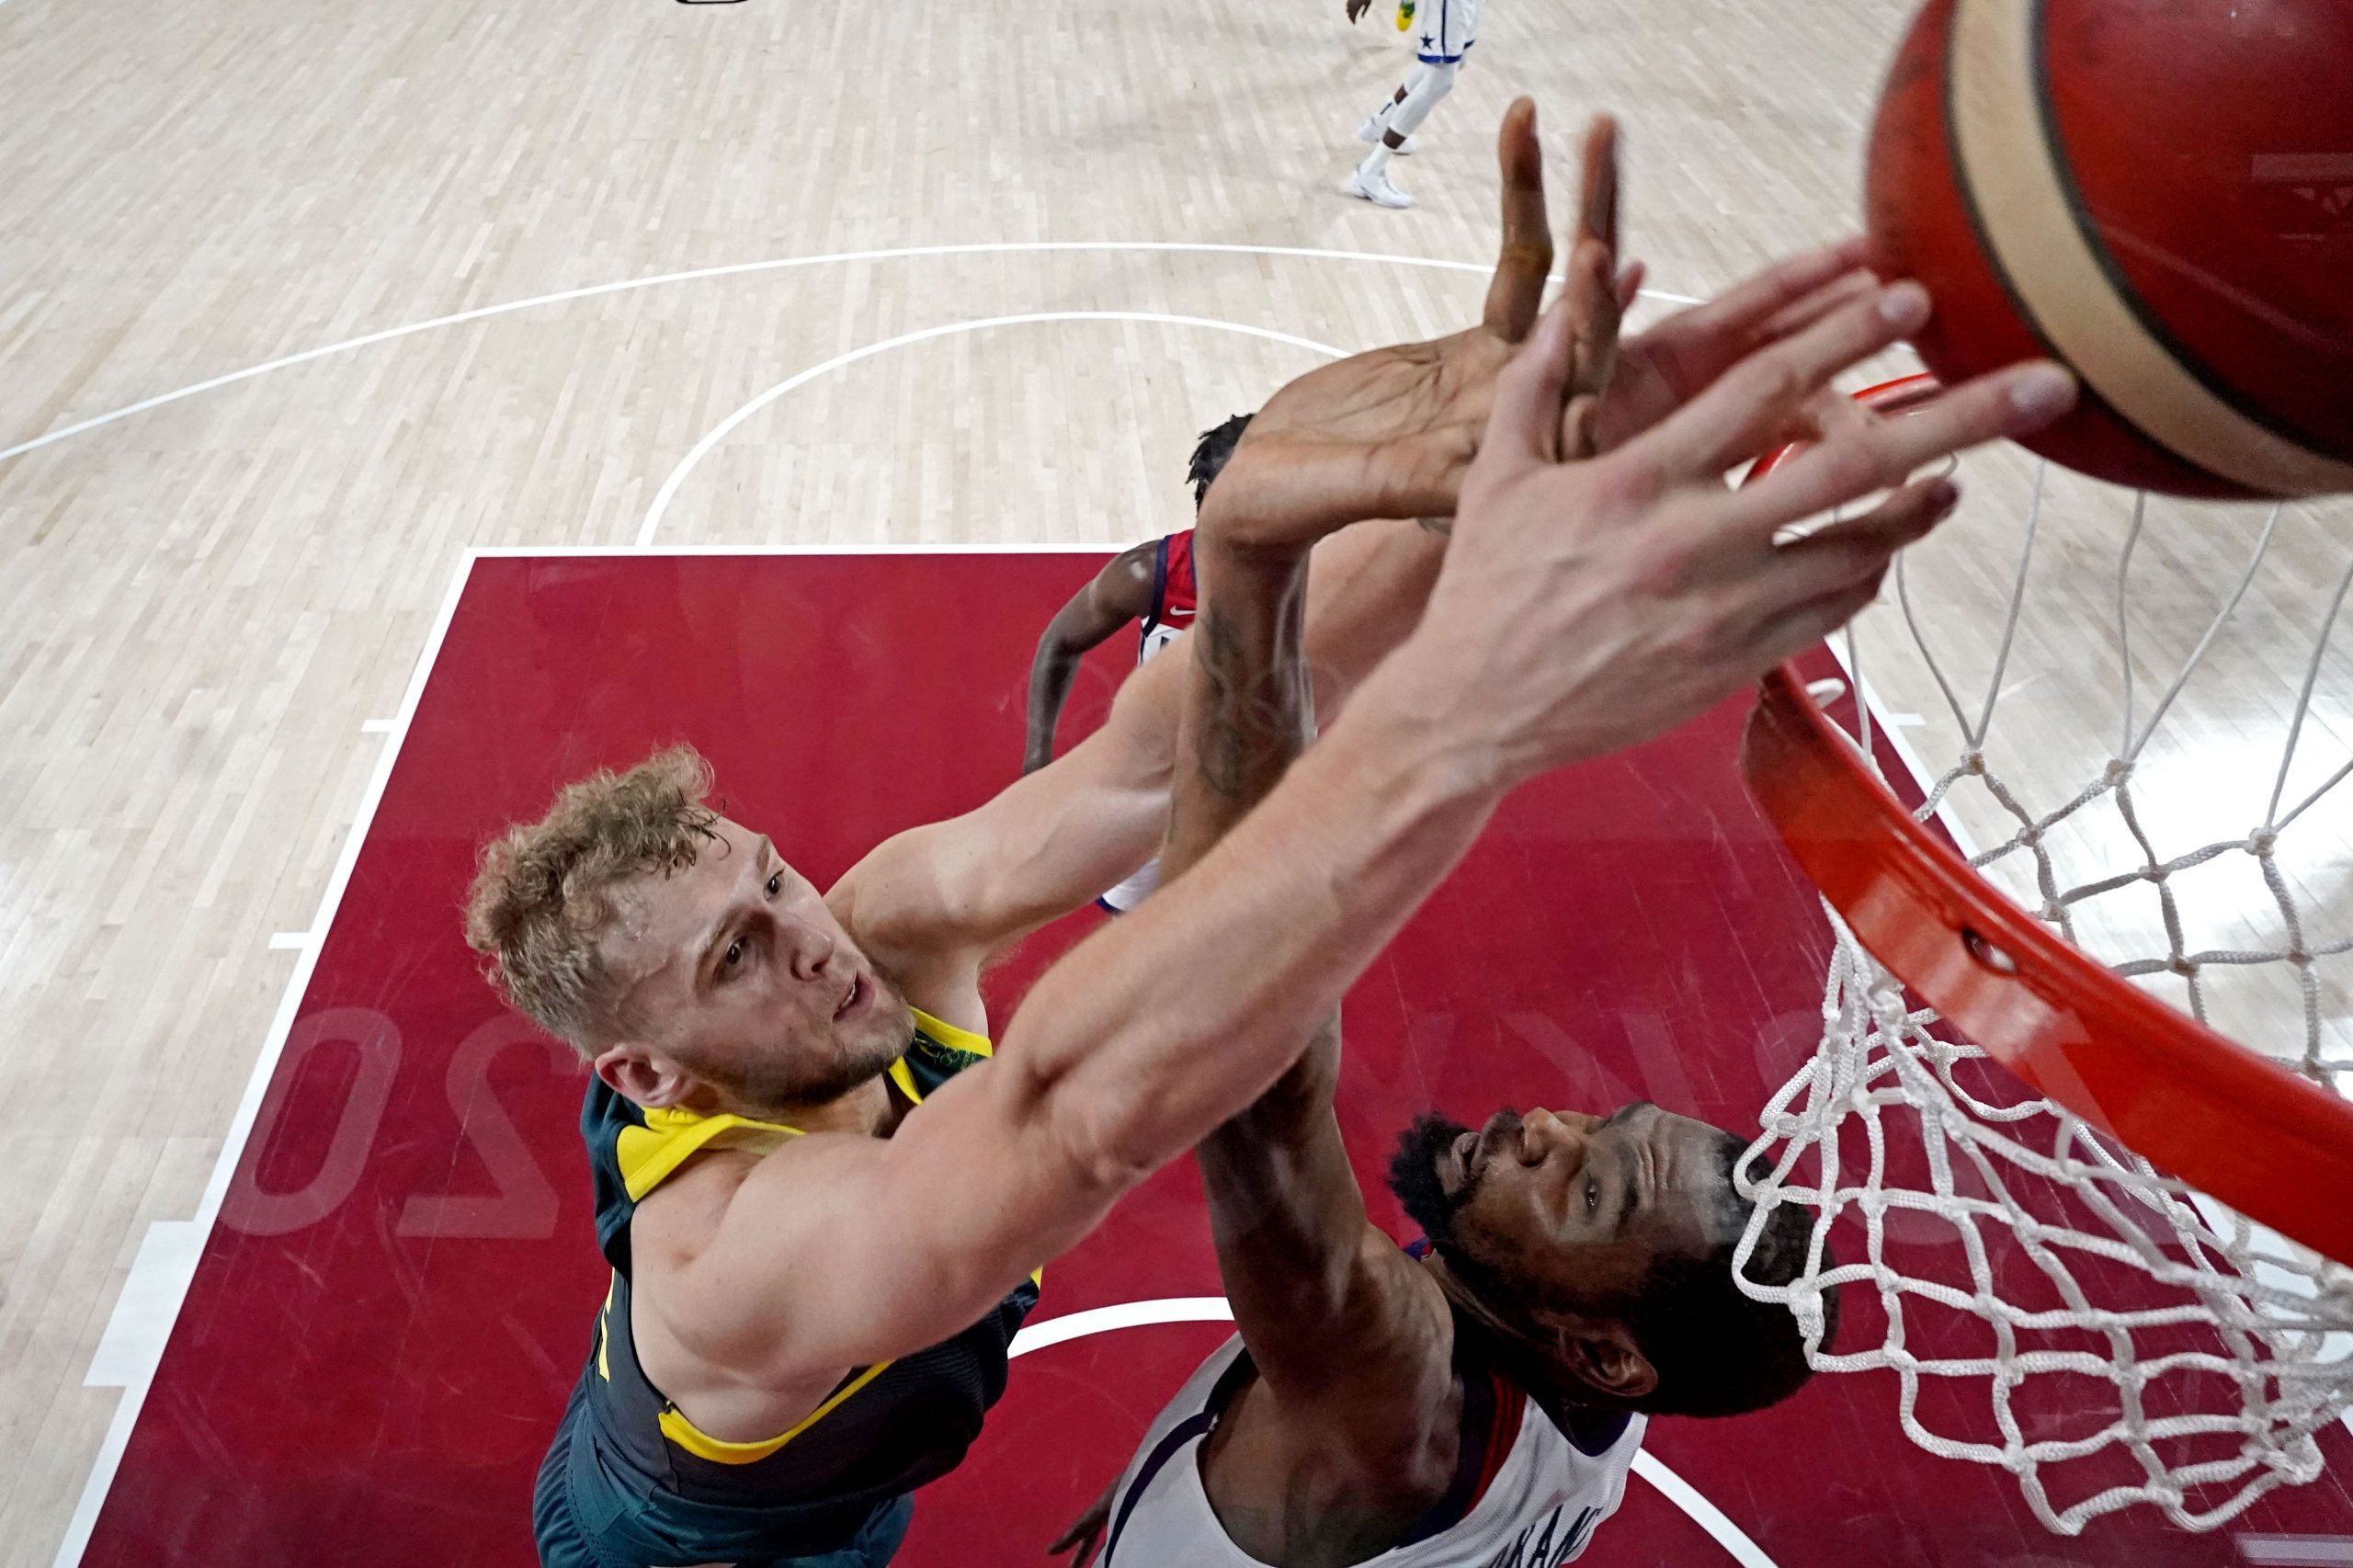 Australia centre Jock Landale (13) shoots the ball against United States forward Kevin Durant (7) in the men's basketball semi final during the Tokyo 2020 Olympic Summer Games at Saitama Super Arena.